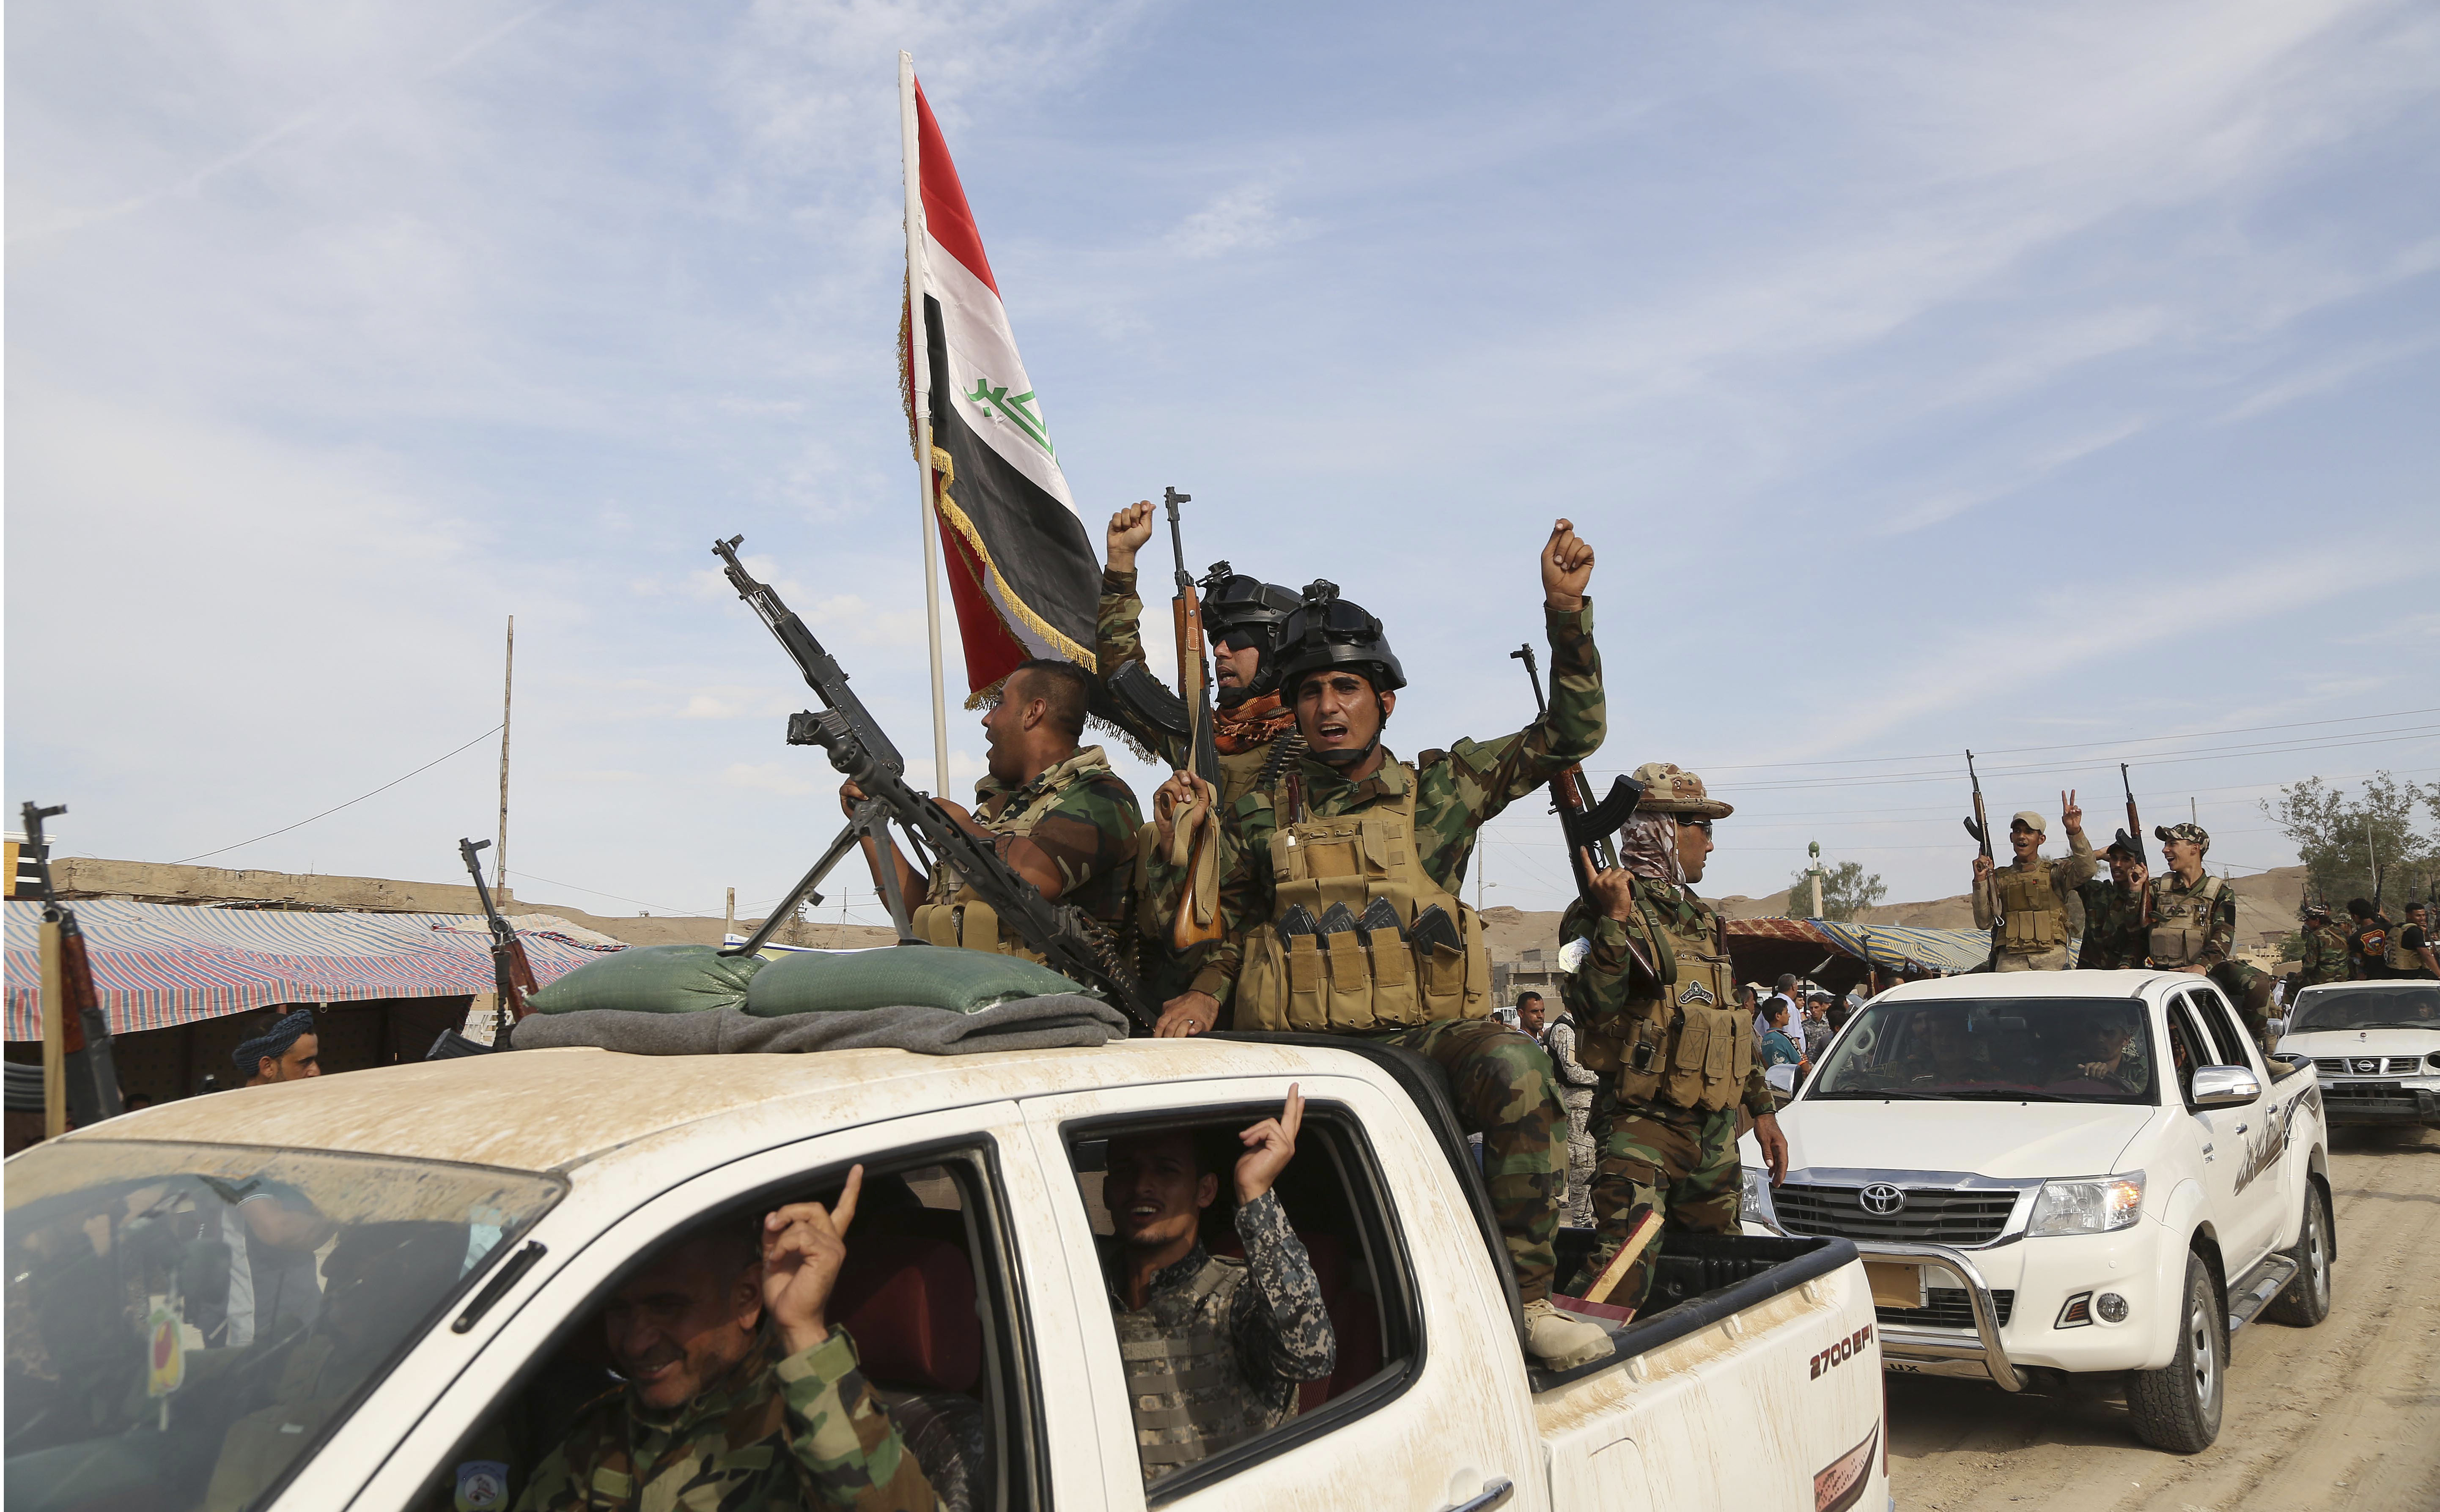 Sunni volunteer fighters parade as they prepare to support Iraqi security forces in liberating the city of Ramadi from Islamic State group militants, in Khalidiya, 60 miles (100 kilometers) west of Baghdad, Iraq, Saturday, Oct. 10, 2015. (AP Photo/Karim Kadim)